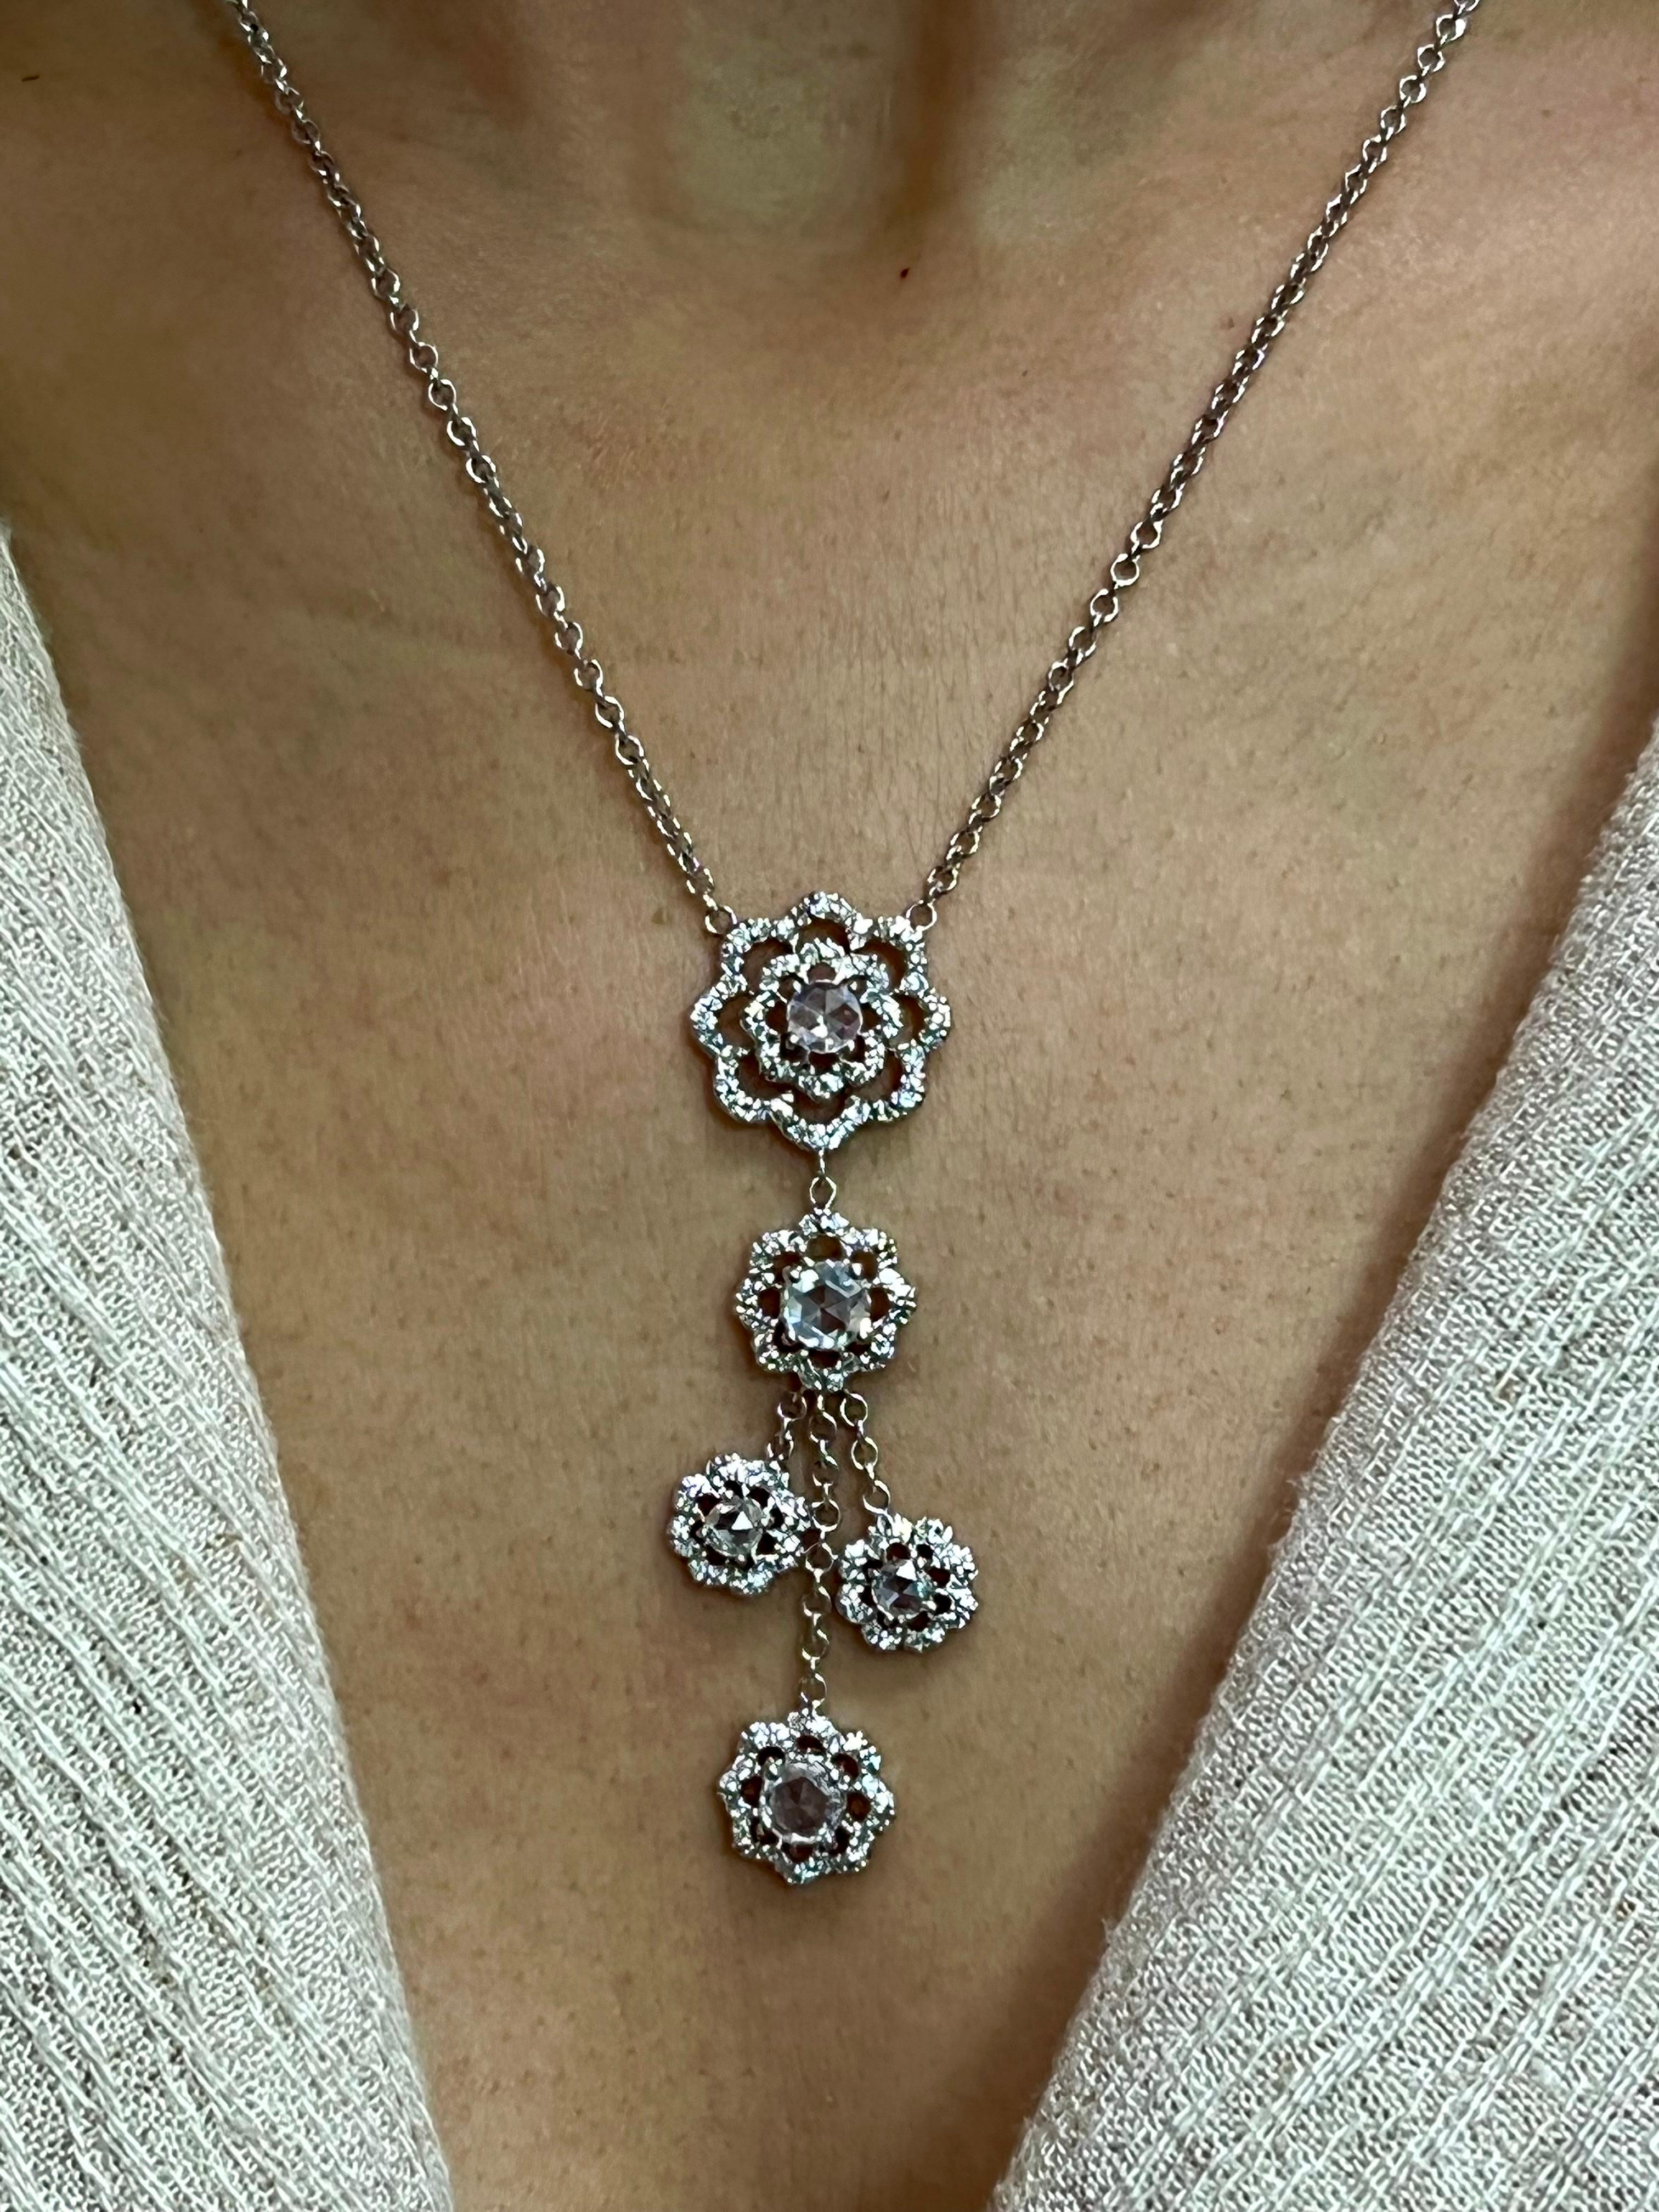 Please check out the HD video!  The pendant is set in 18k white gold with new rose cut and round brilliant cut diamonds. There are 5 larger new rose cut diamonds totaling 1.24cts and 128 round brilliant diamonds 0.64cts. All in all a total of